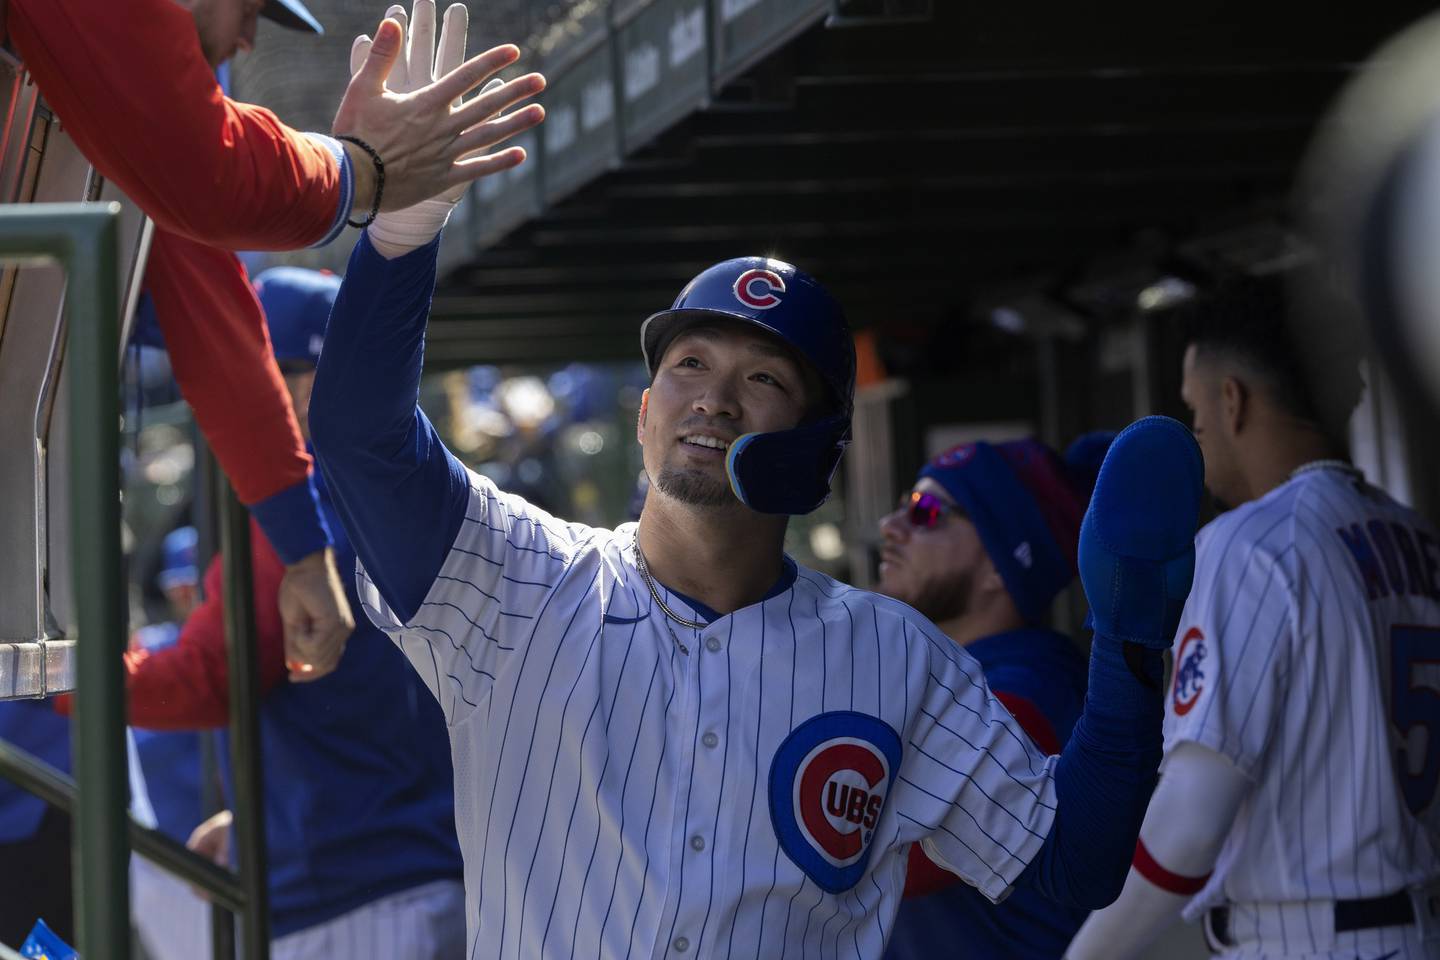 Cubs right fielder Seiya Suzuki celebrates after scoring on a first-inning double by Patrick Wisdom against the Phillies on Sept. 29, 2022, at Wrigley Field.